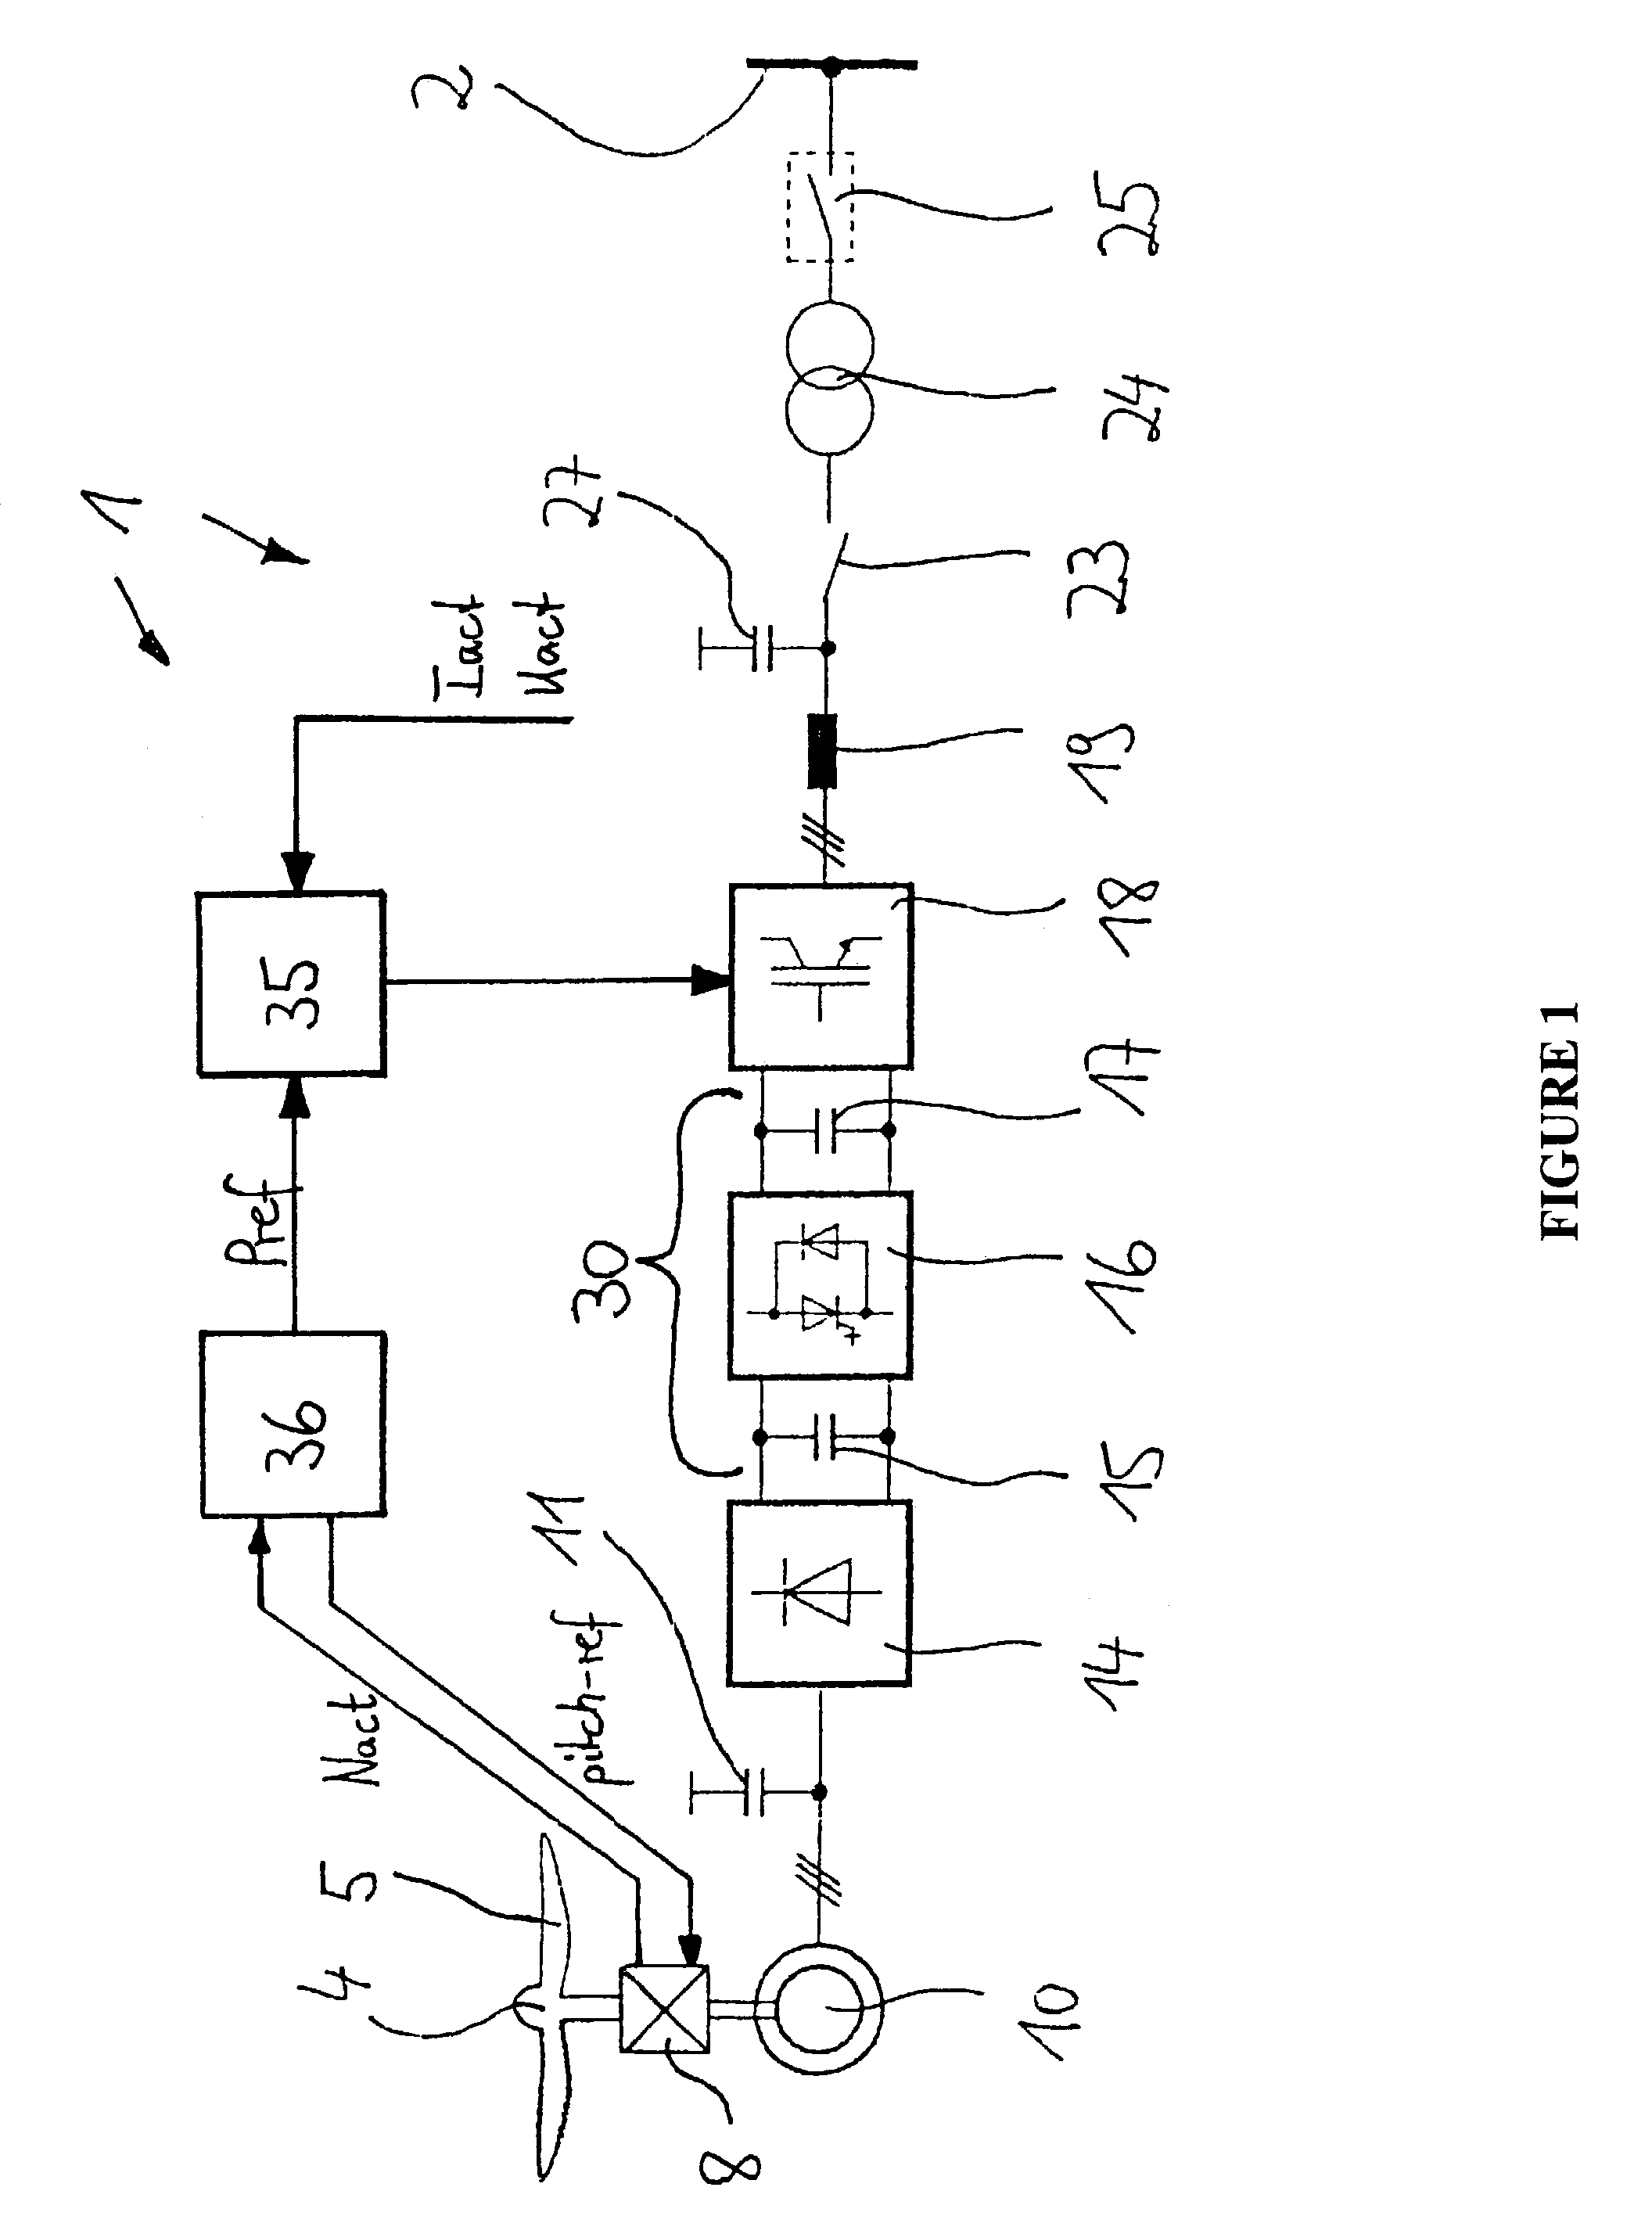 Wind turbine for producing electrical power and a method of operating the same